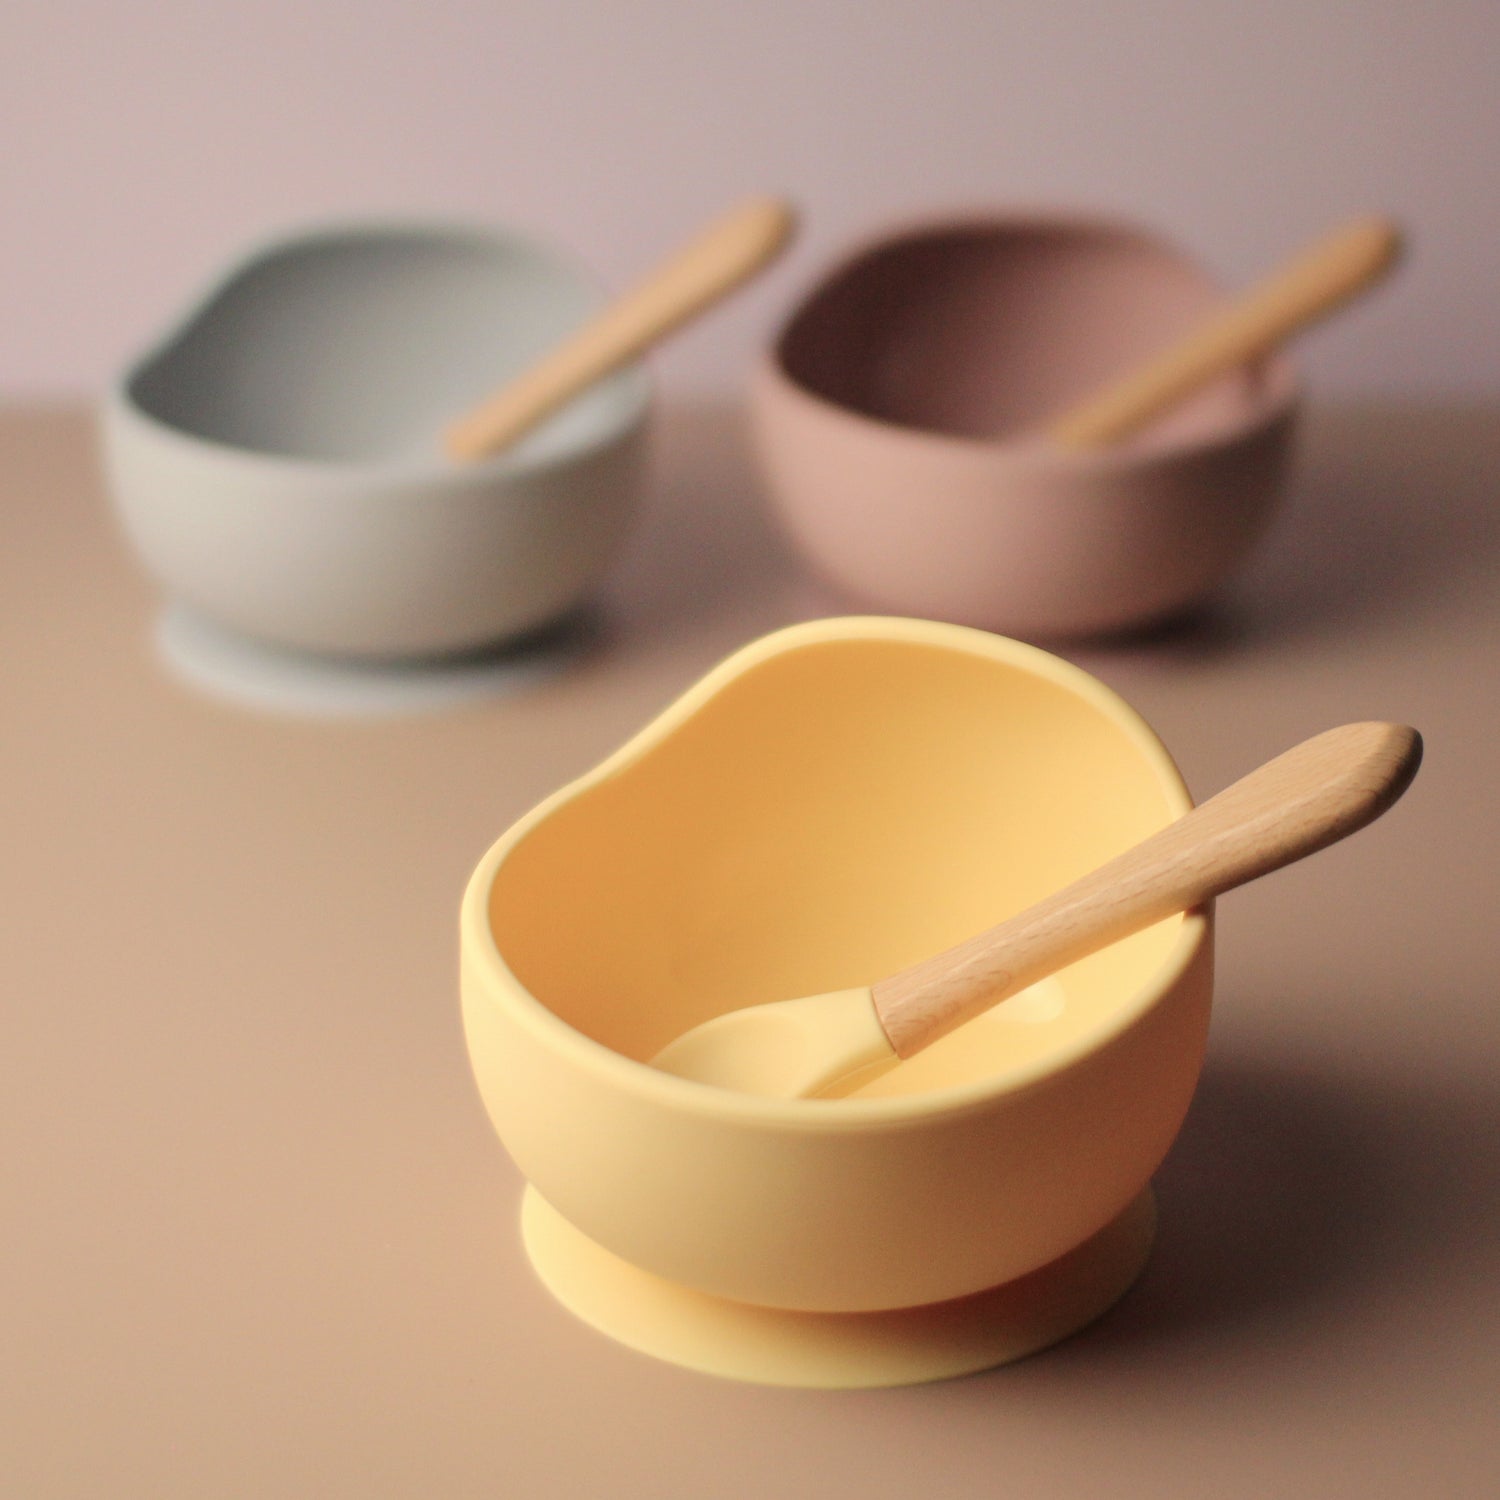 baby feeding silicone suction bowl in maroon, grey and yellow, with matching wooden handle spoon